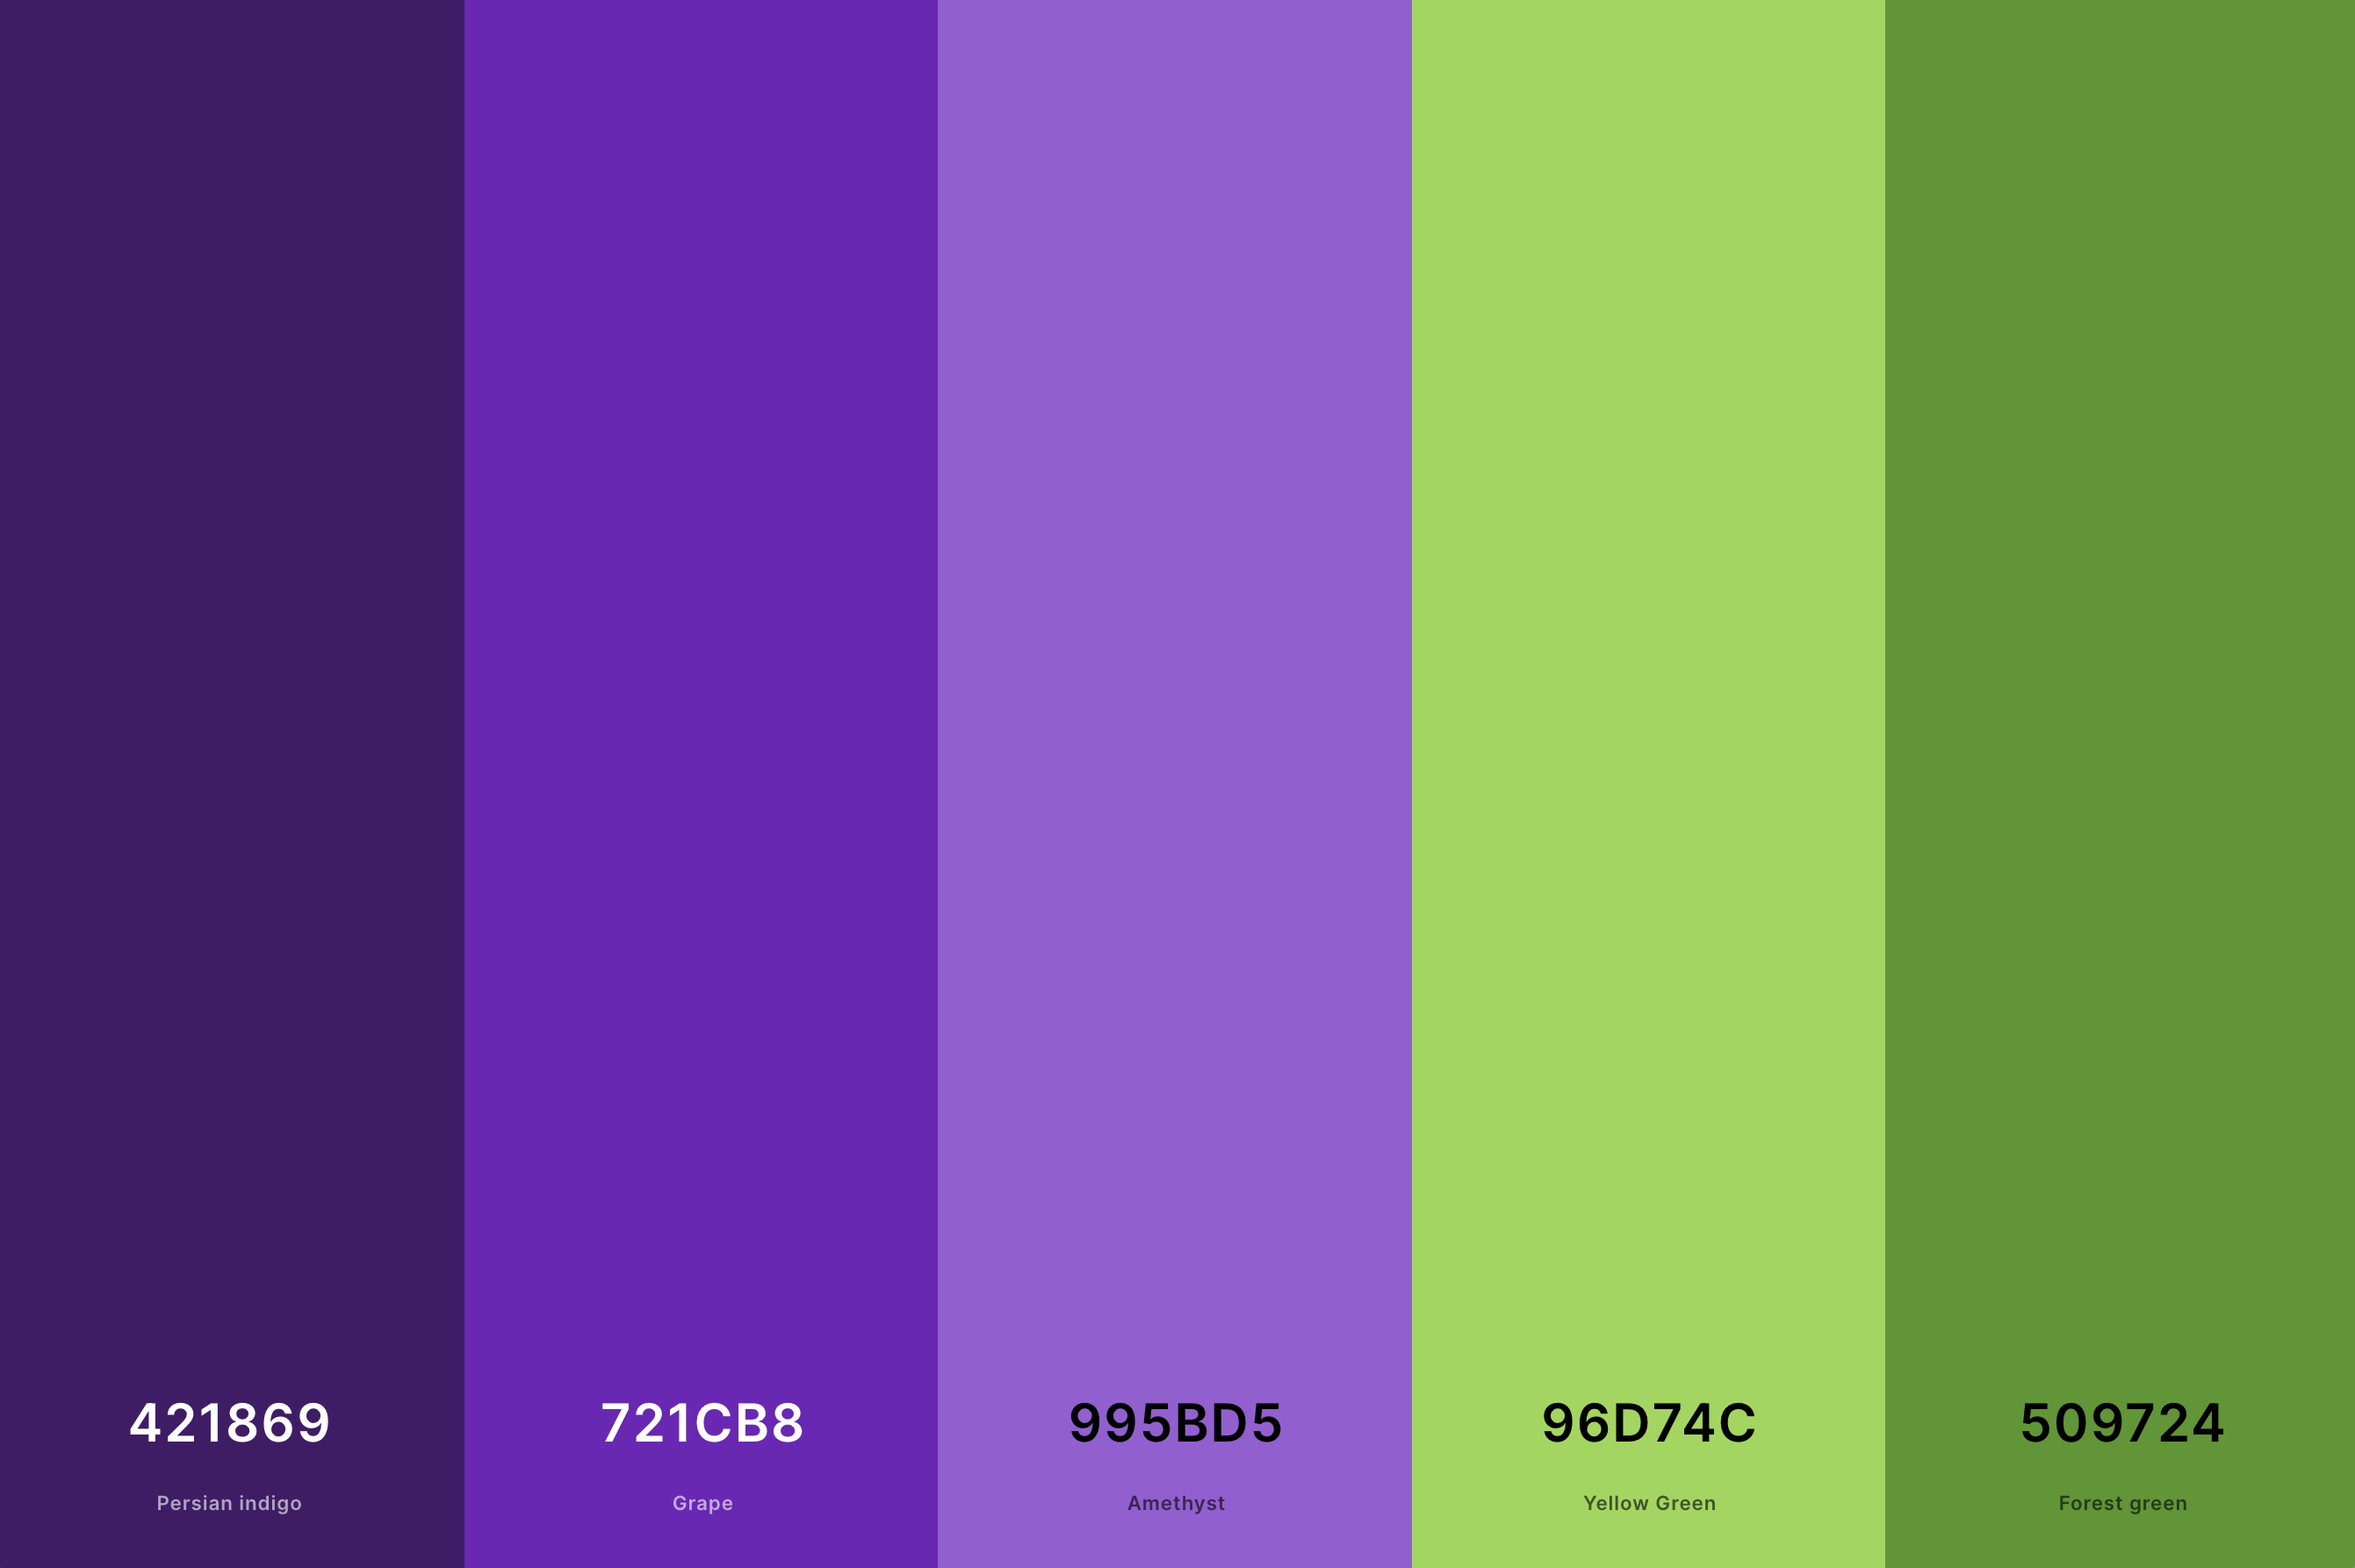 1. Purple And Green Color Palette Color Palette with Persian Indigo (Hex #421869) + Grape (Hex #721CB8) + Amethyst (Hex #995BD5) + Yellow Green (Hex #96D74C) + Forest Green (Hex #509724) Color Palette with Hex Codes